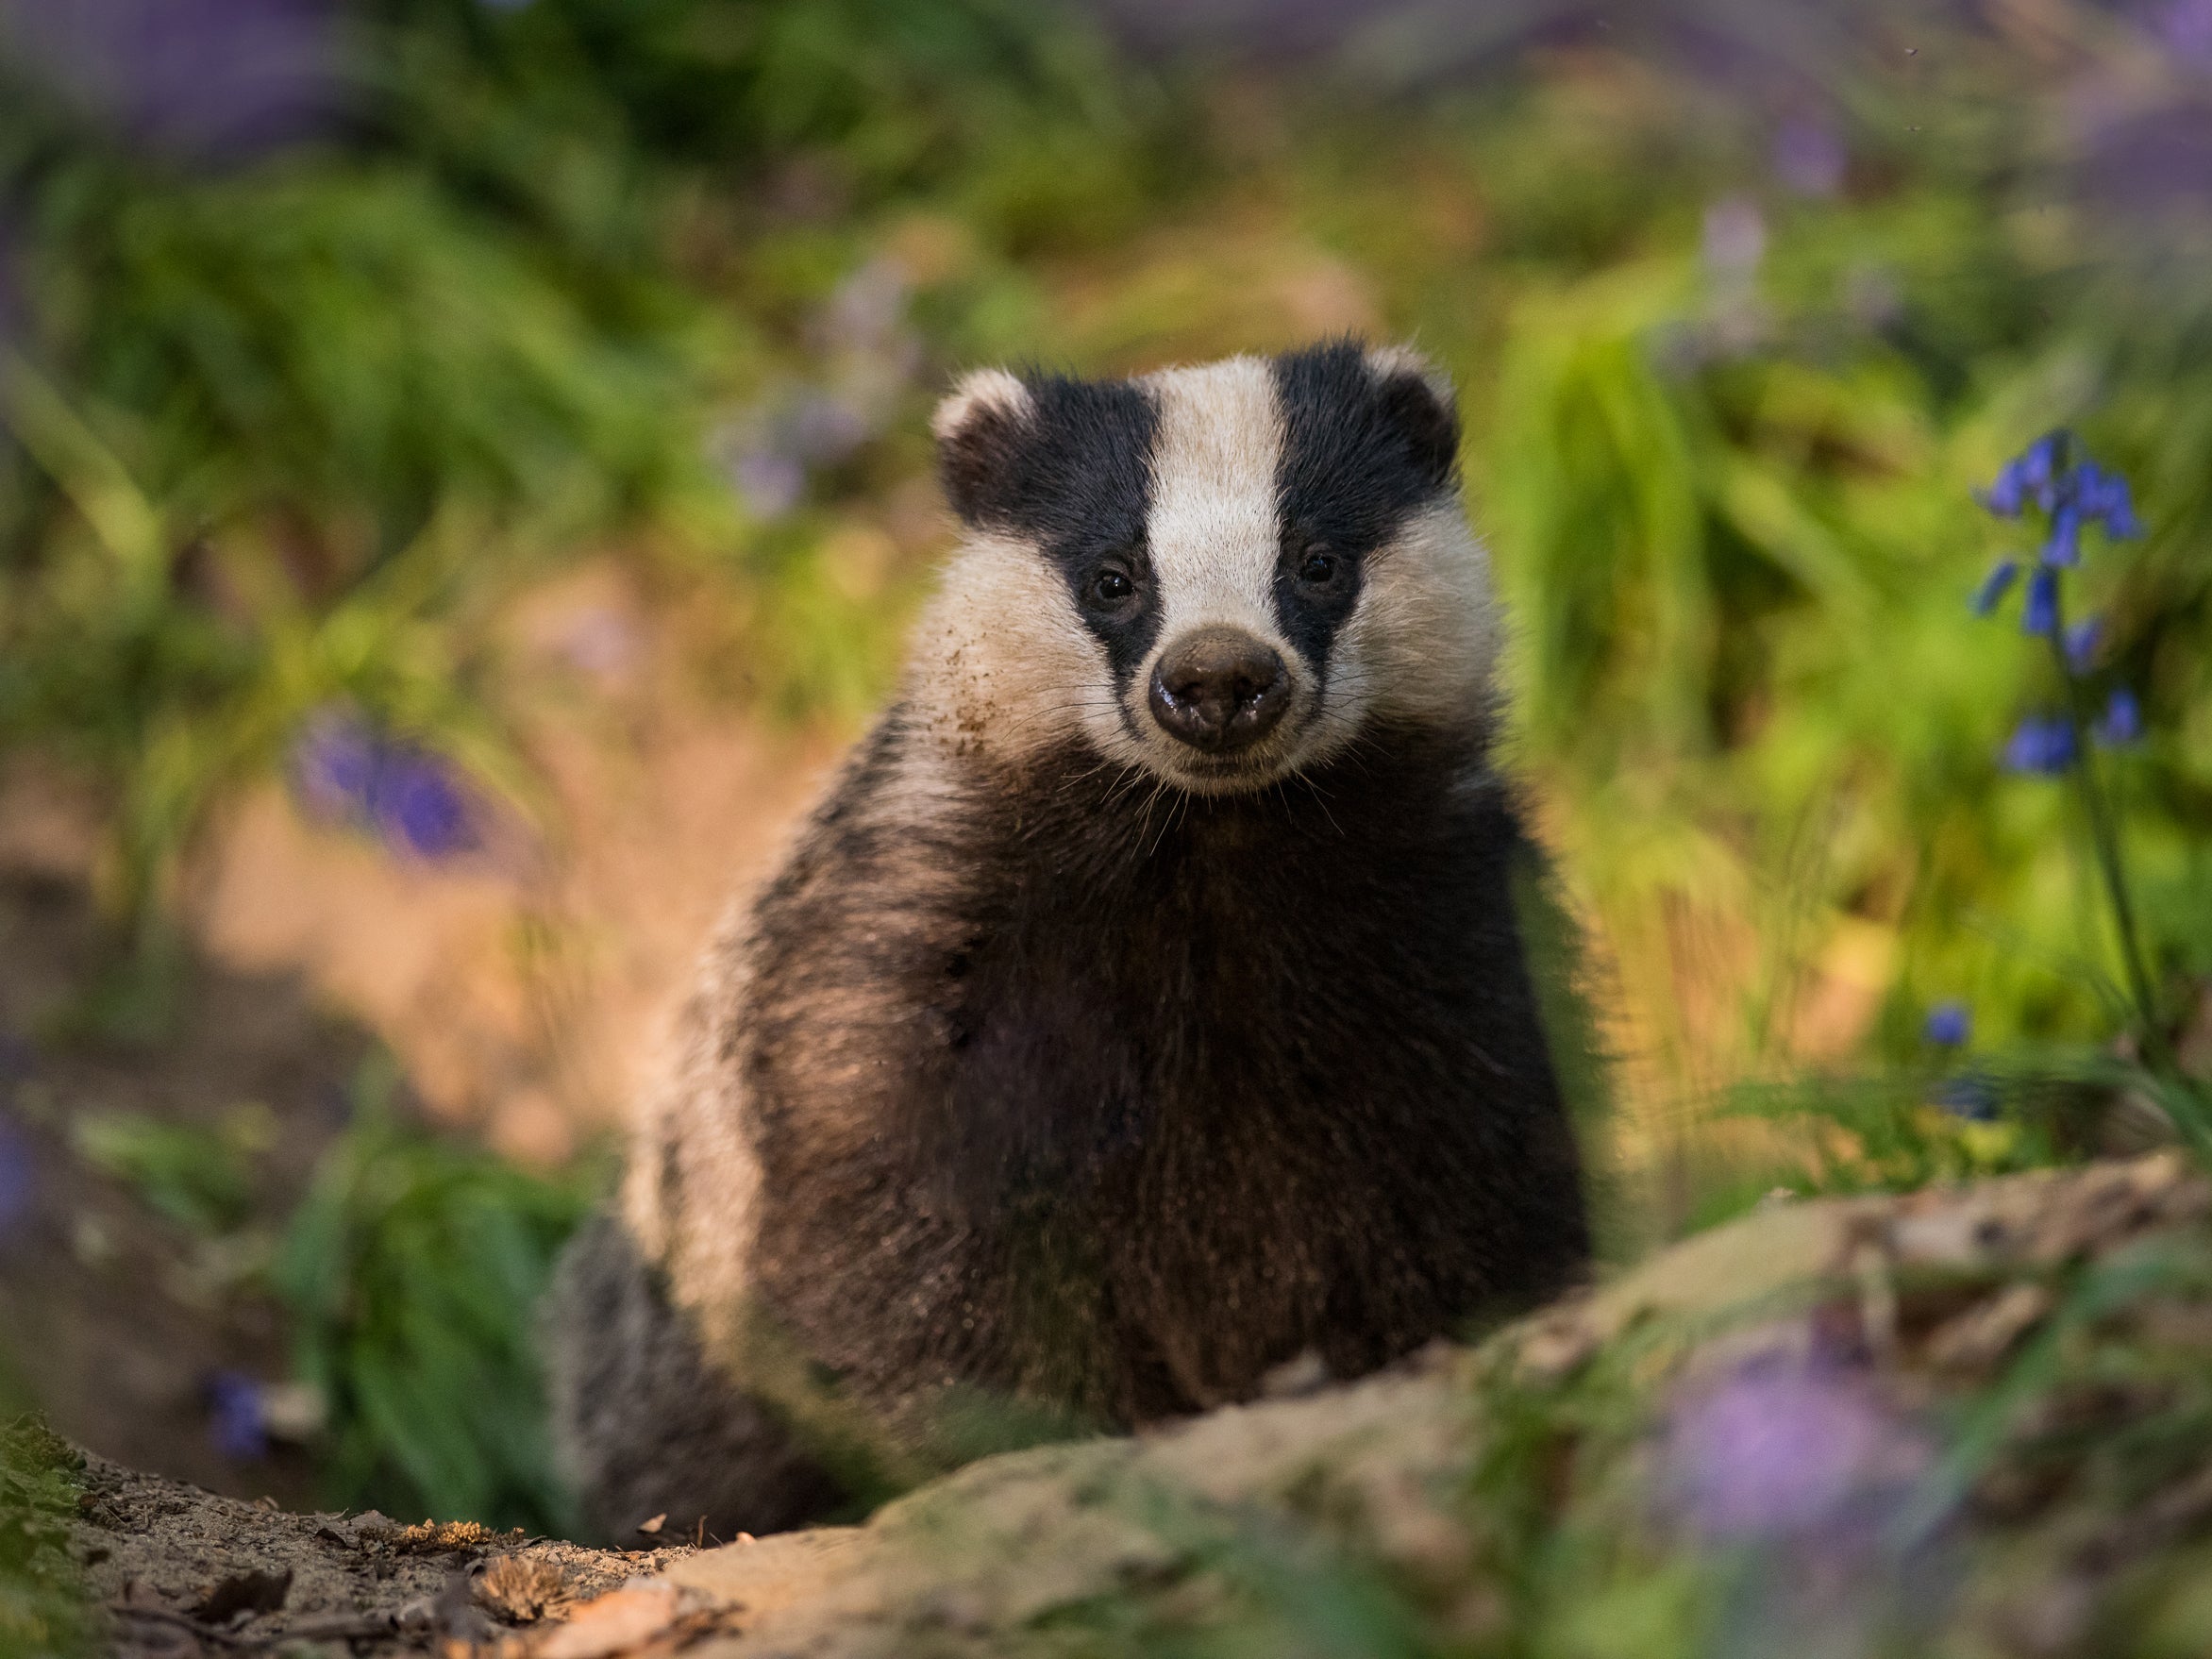 Badgers in Britain have recovered in recent years due to a decline in persecution, but the authors of the new report warned of the future impact of legal culls to prevent bovine TB